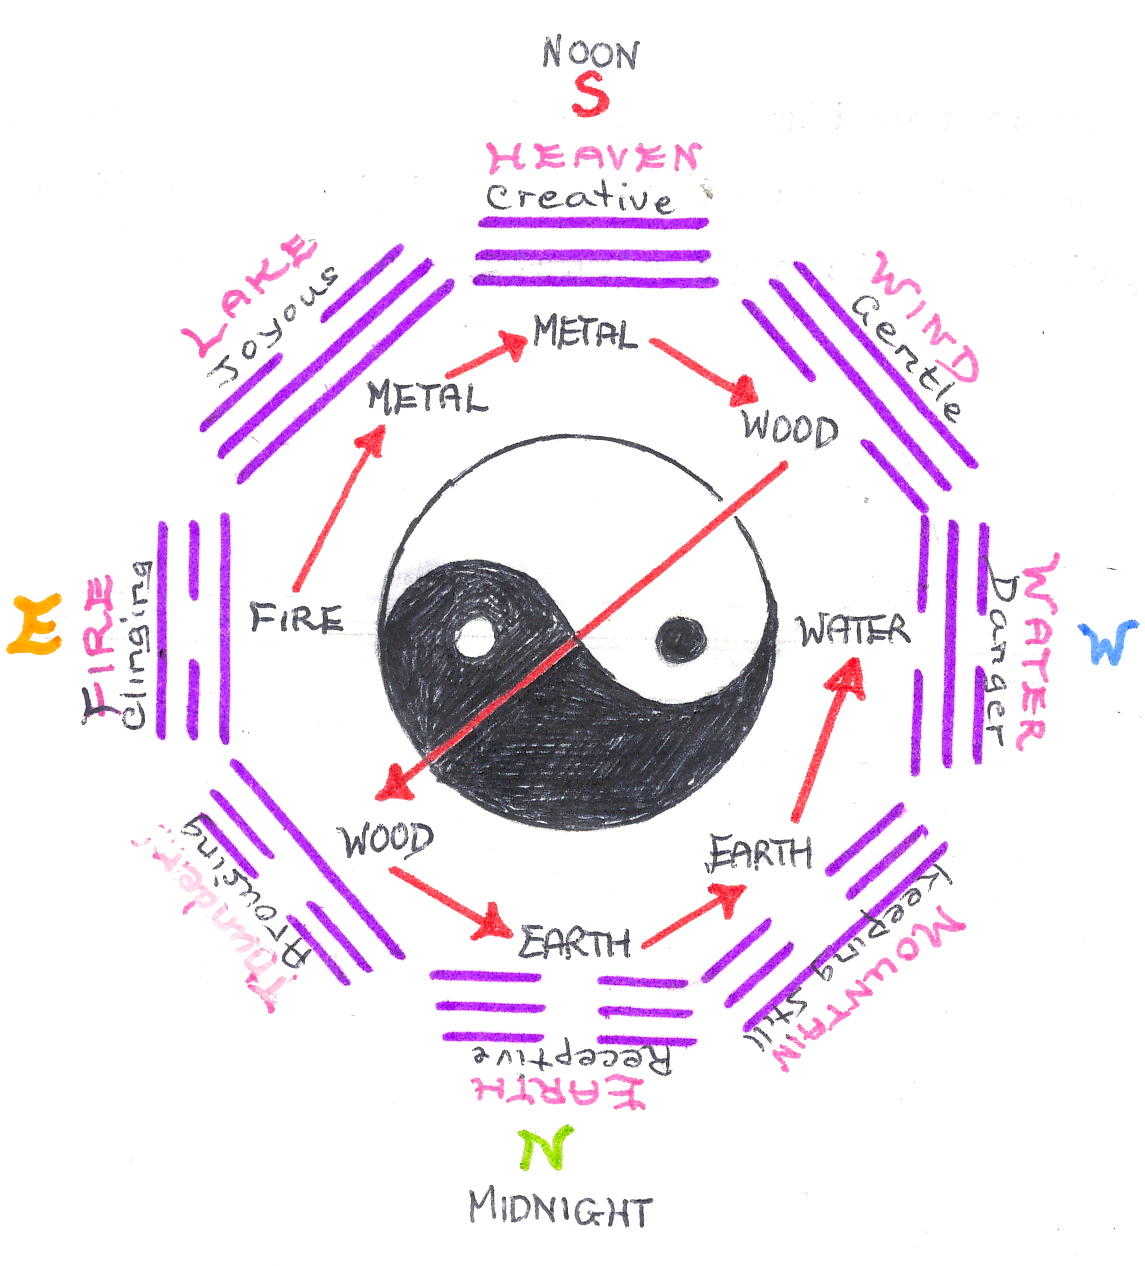 Yin yang Design. Yin and yang Transformer. Earlier and after Heaven sequence Trigrams.